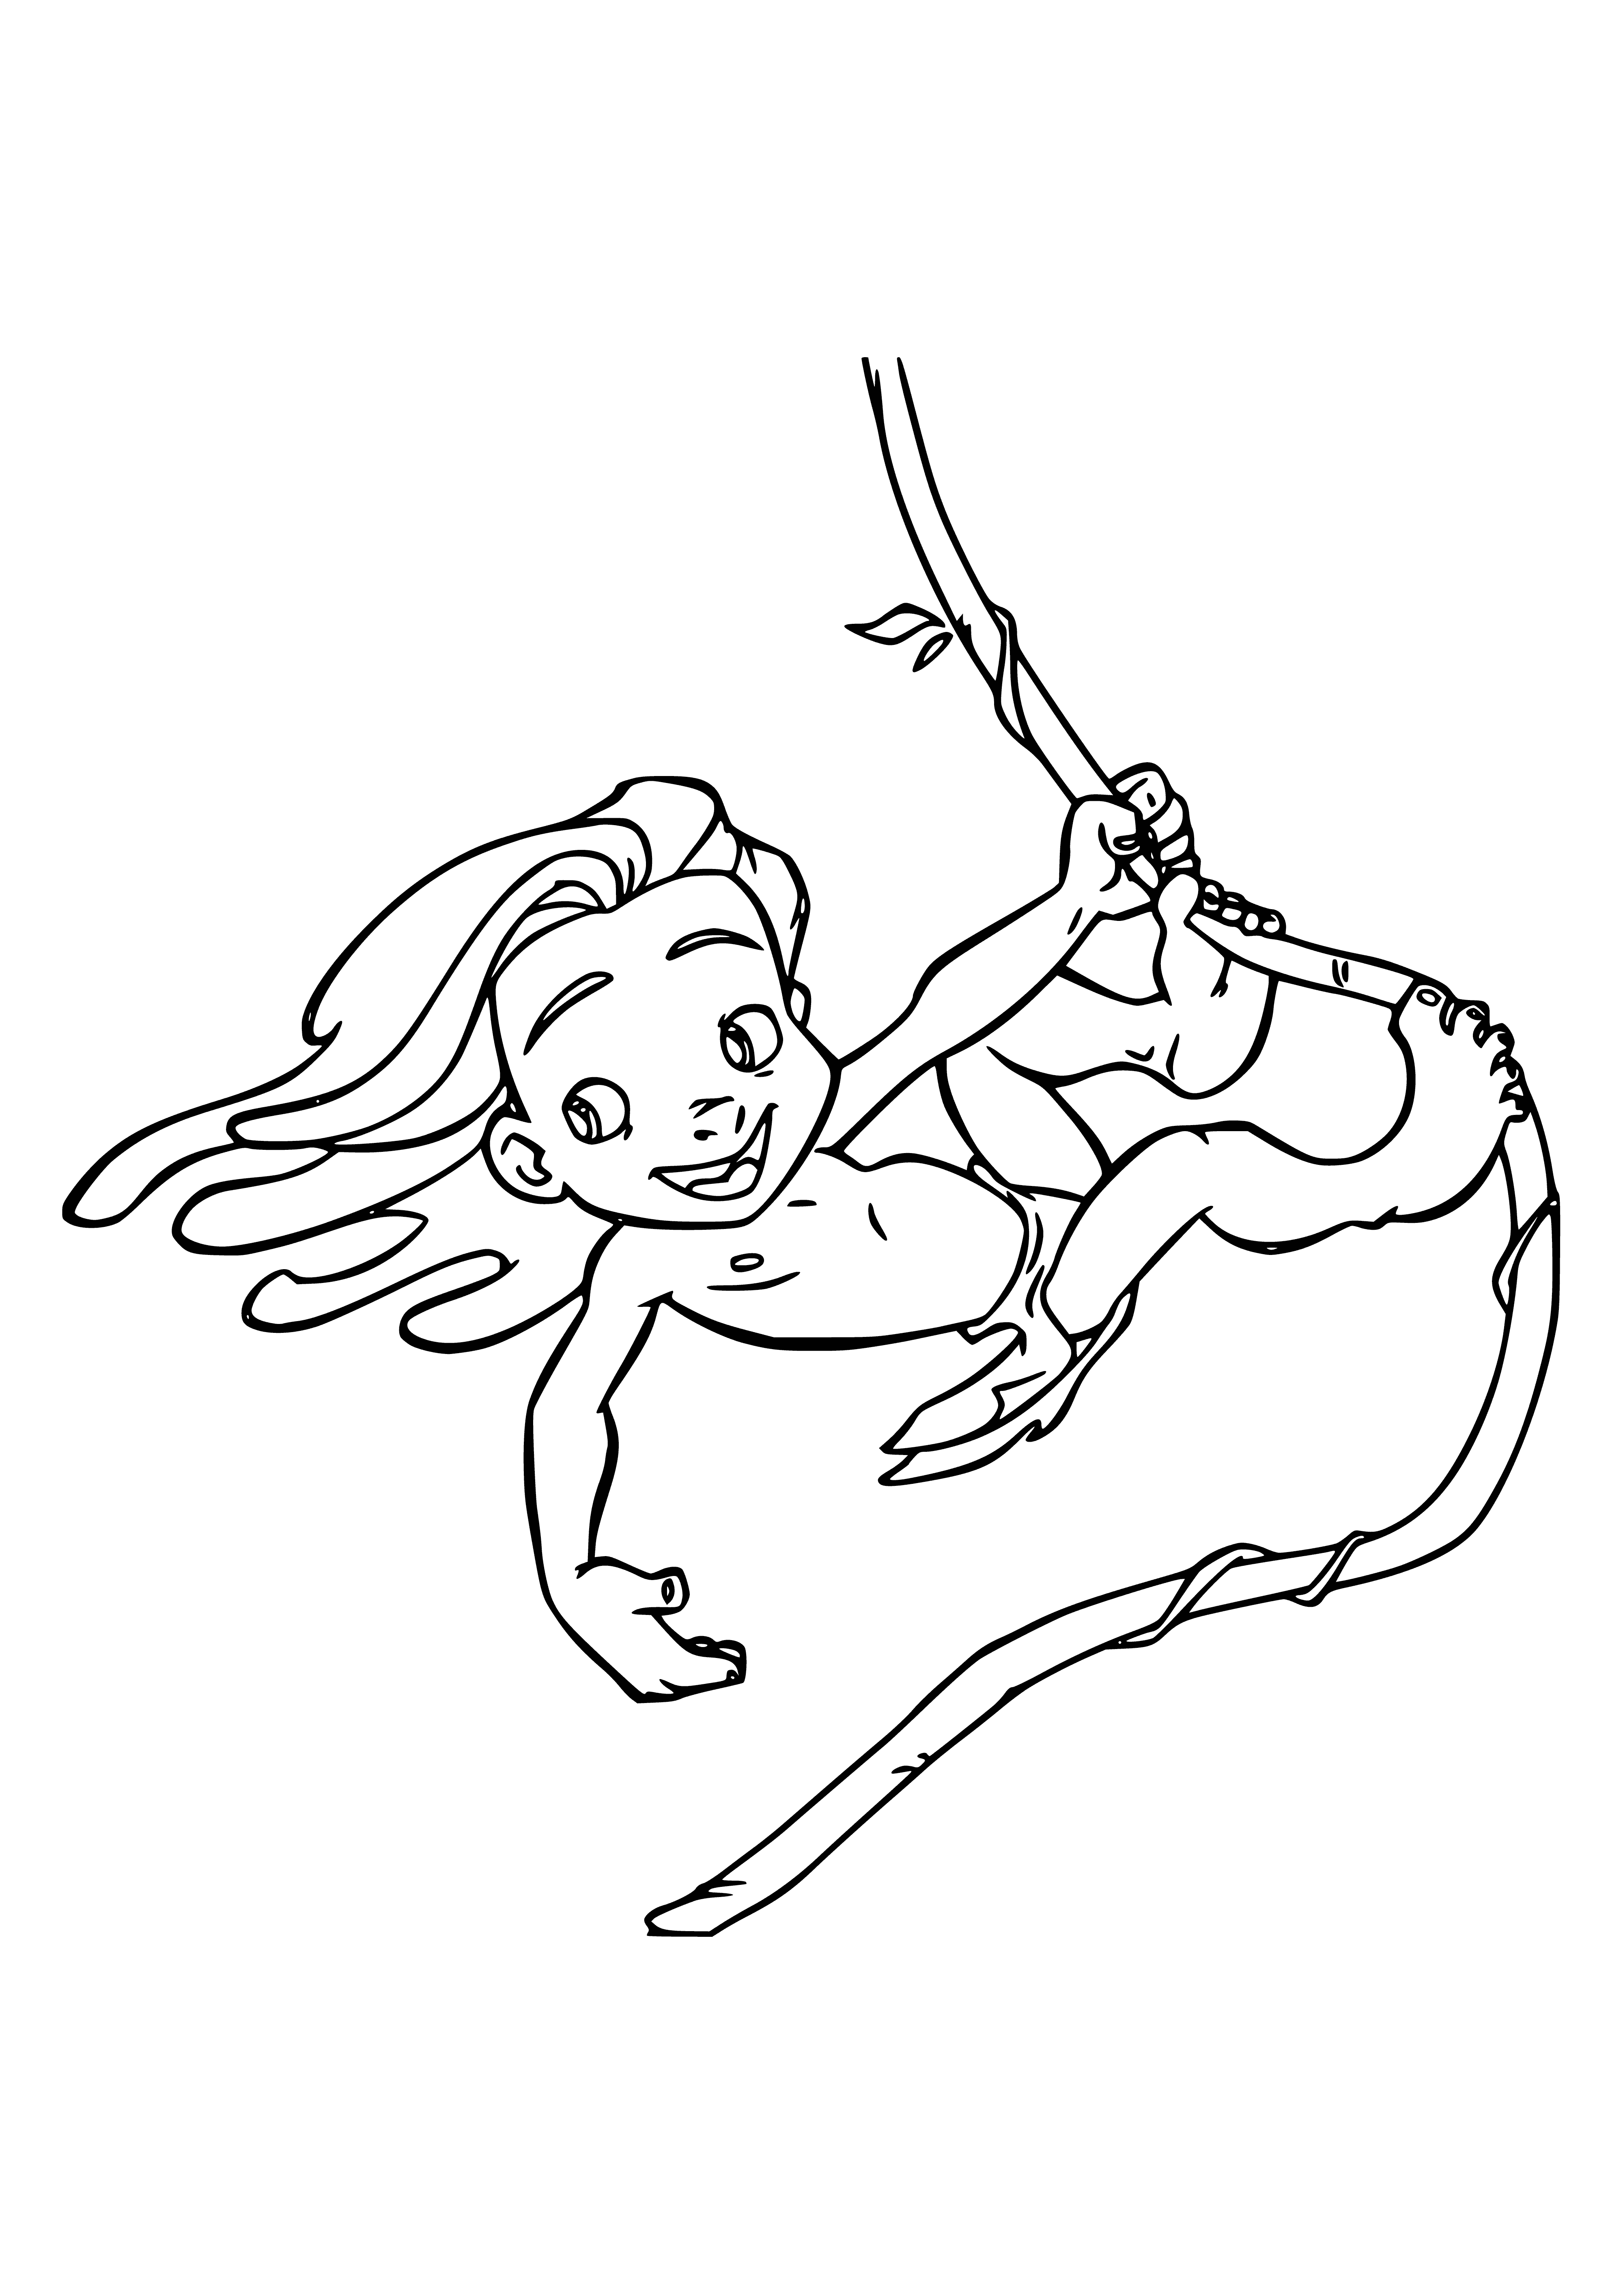 coloring page: A boy, around 8-10 years old, is bare chested and wearing a loincloth made of animal skin. He hangs one-handed from a liana vine, holding a spear downward and looking below.